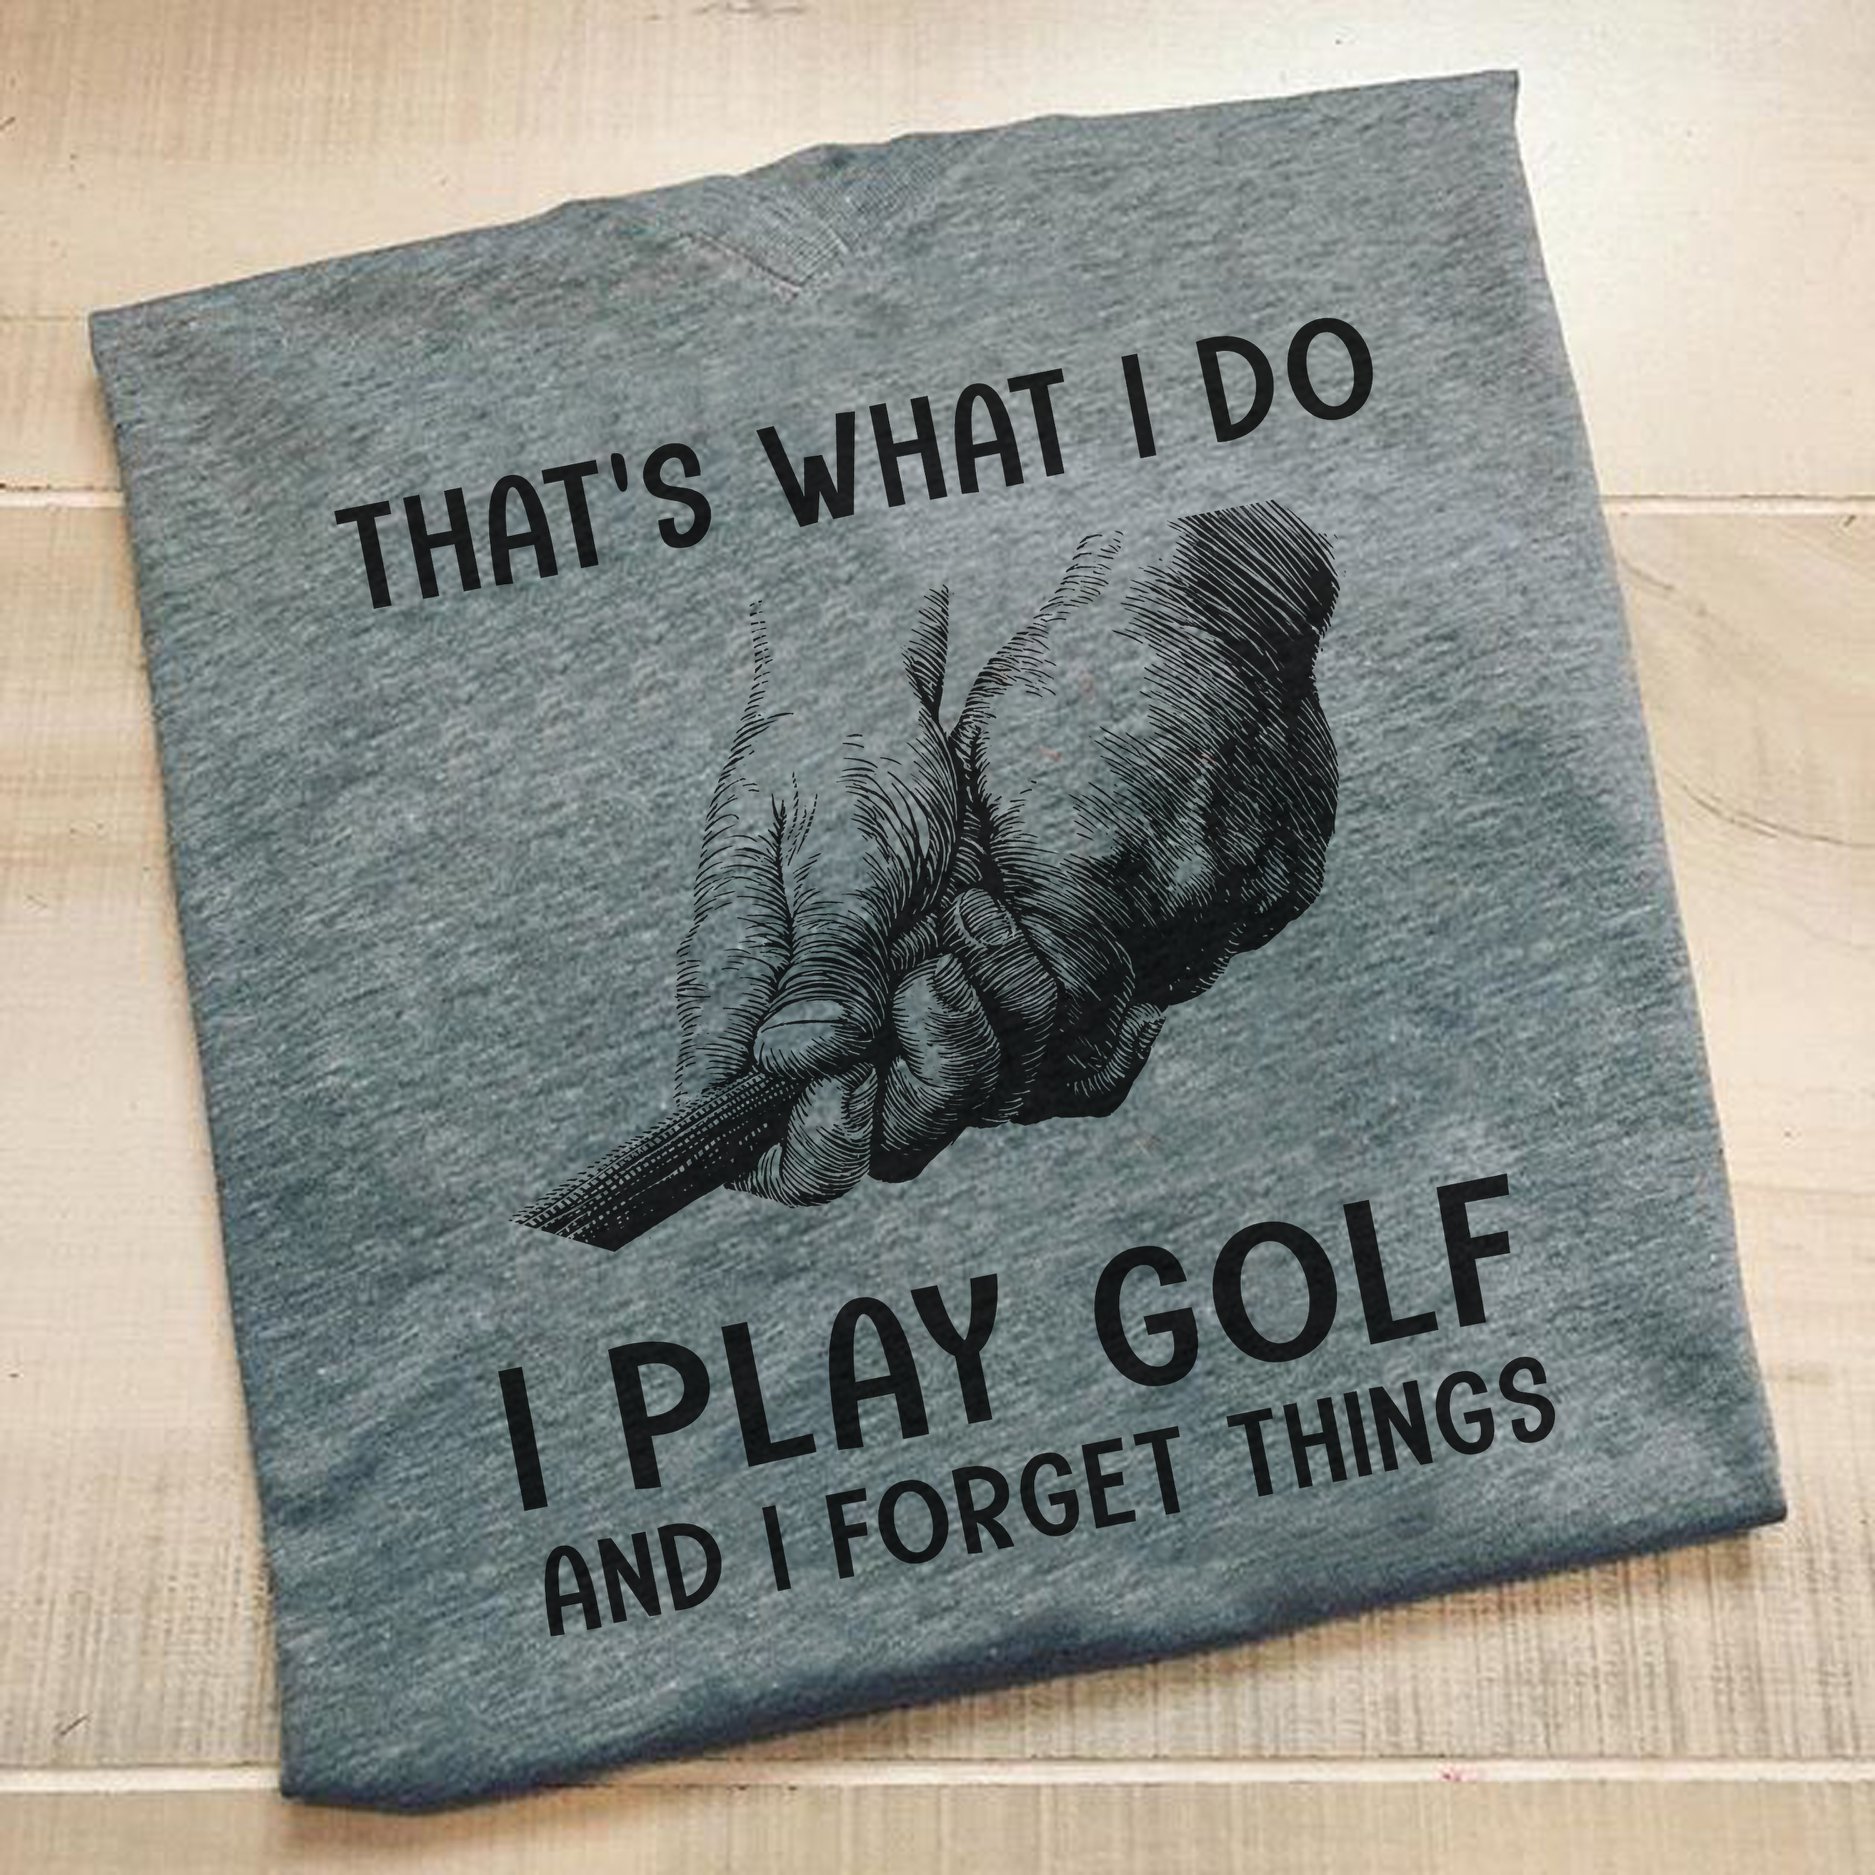 That's what I do I play golf and forget things - The golfer